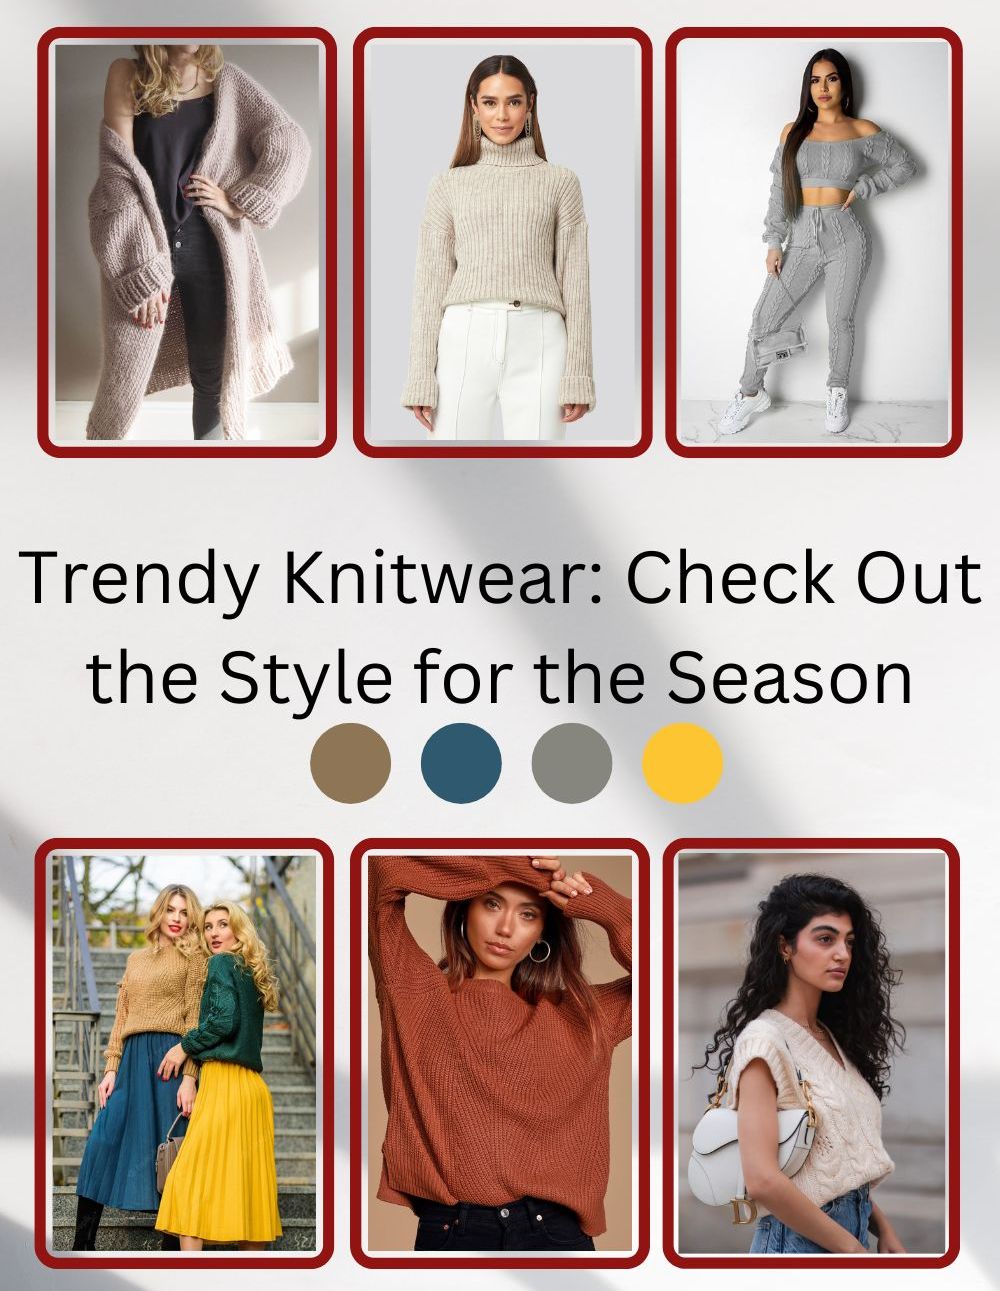 Trendy Knitwear: Check Out the Style for the Season